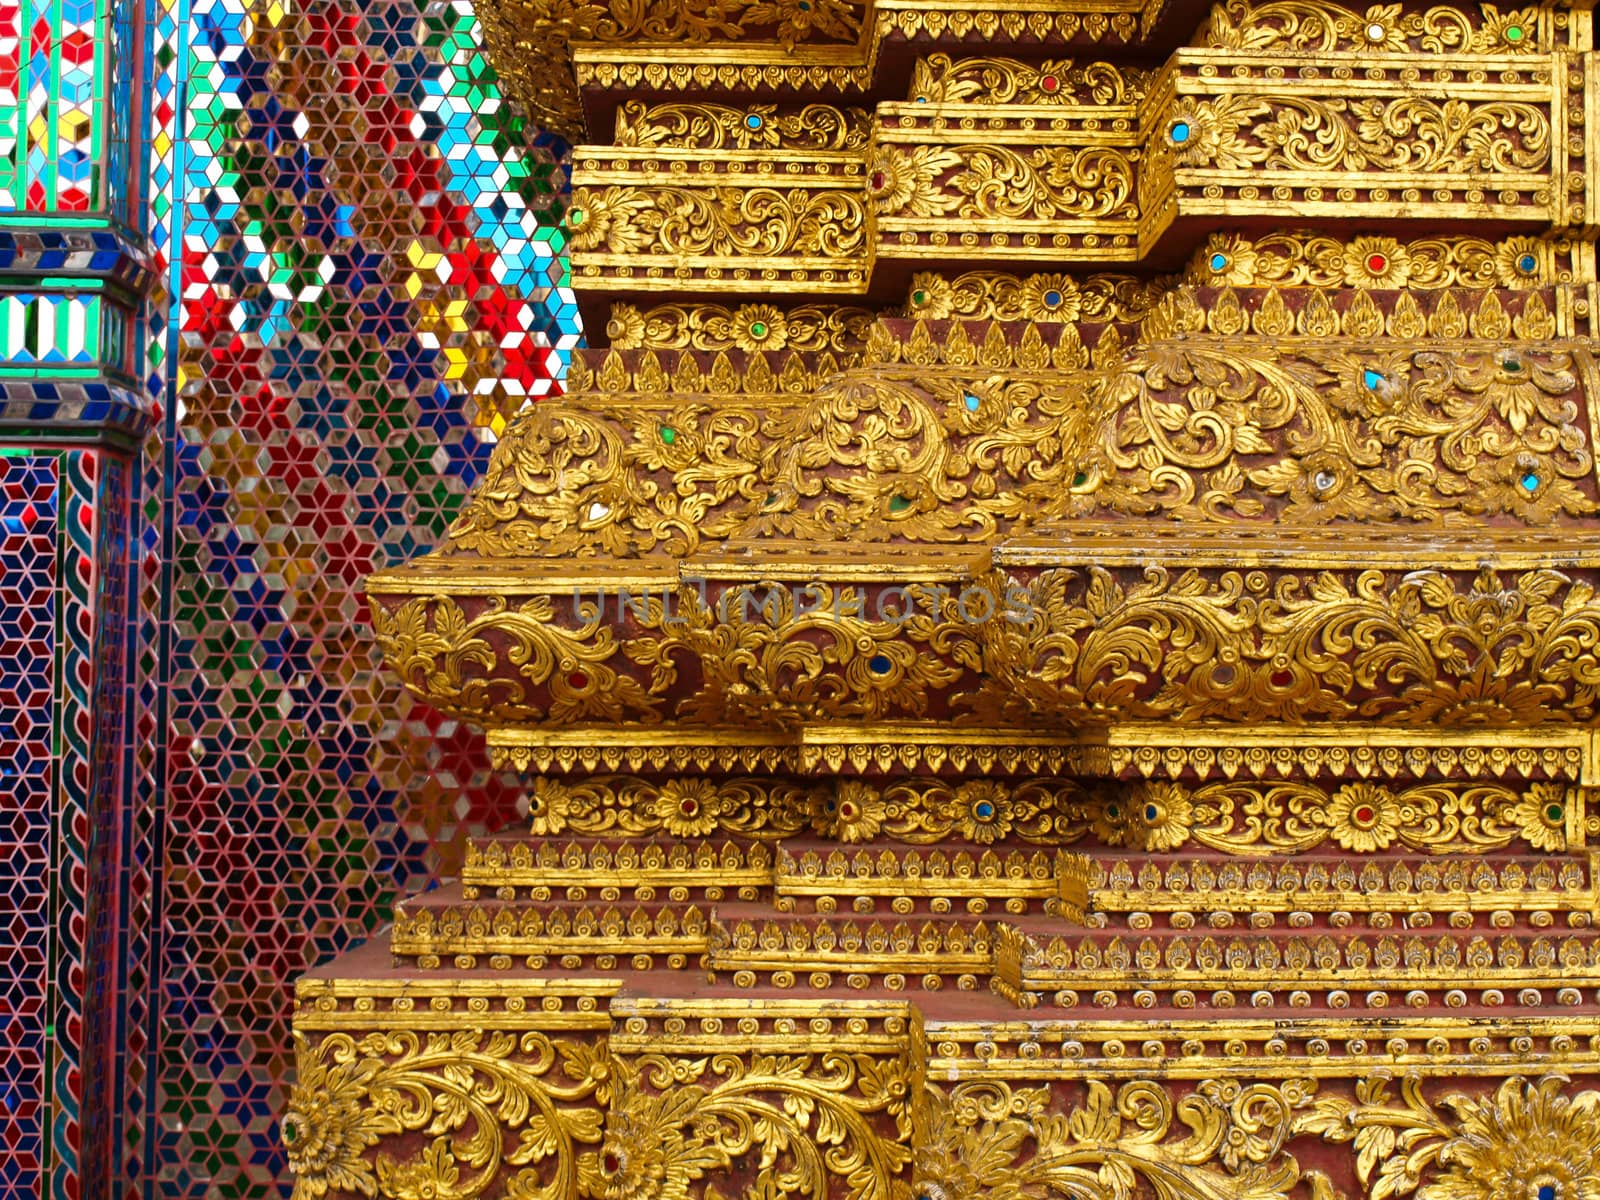 Golden engraved stucco decoration in Buddhist vihara in Thailand